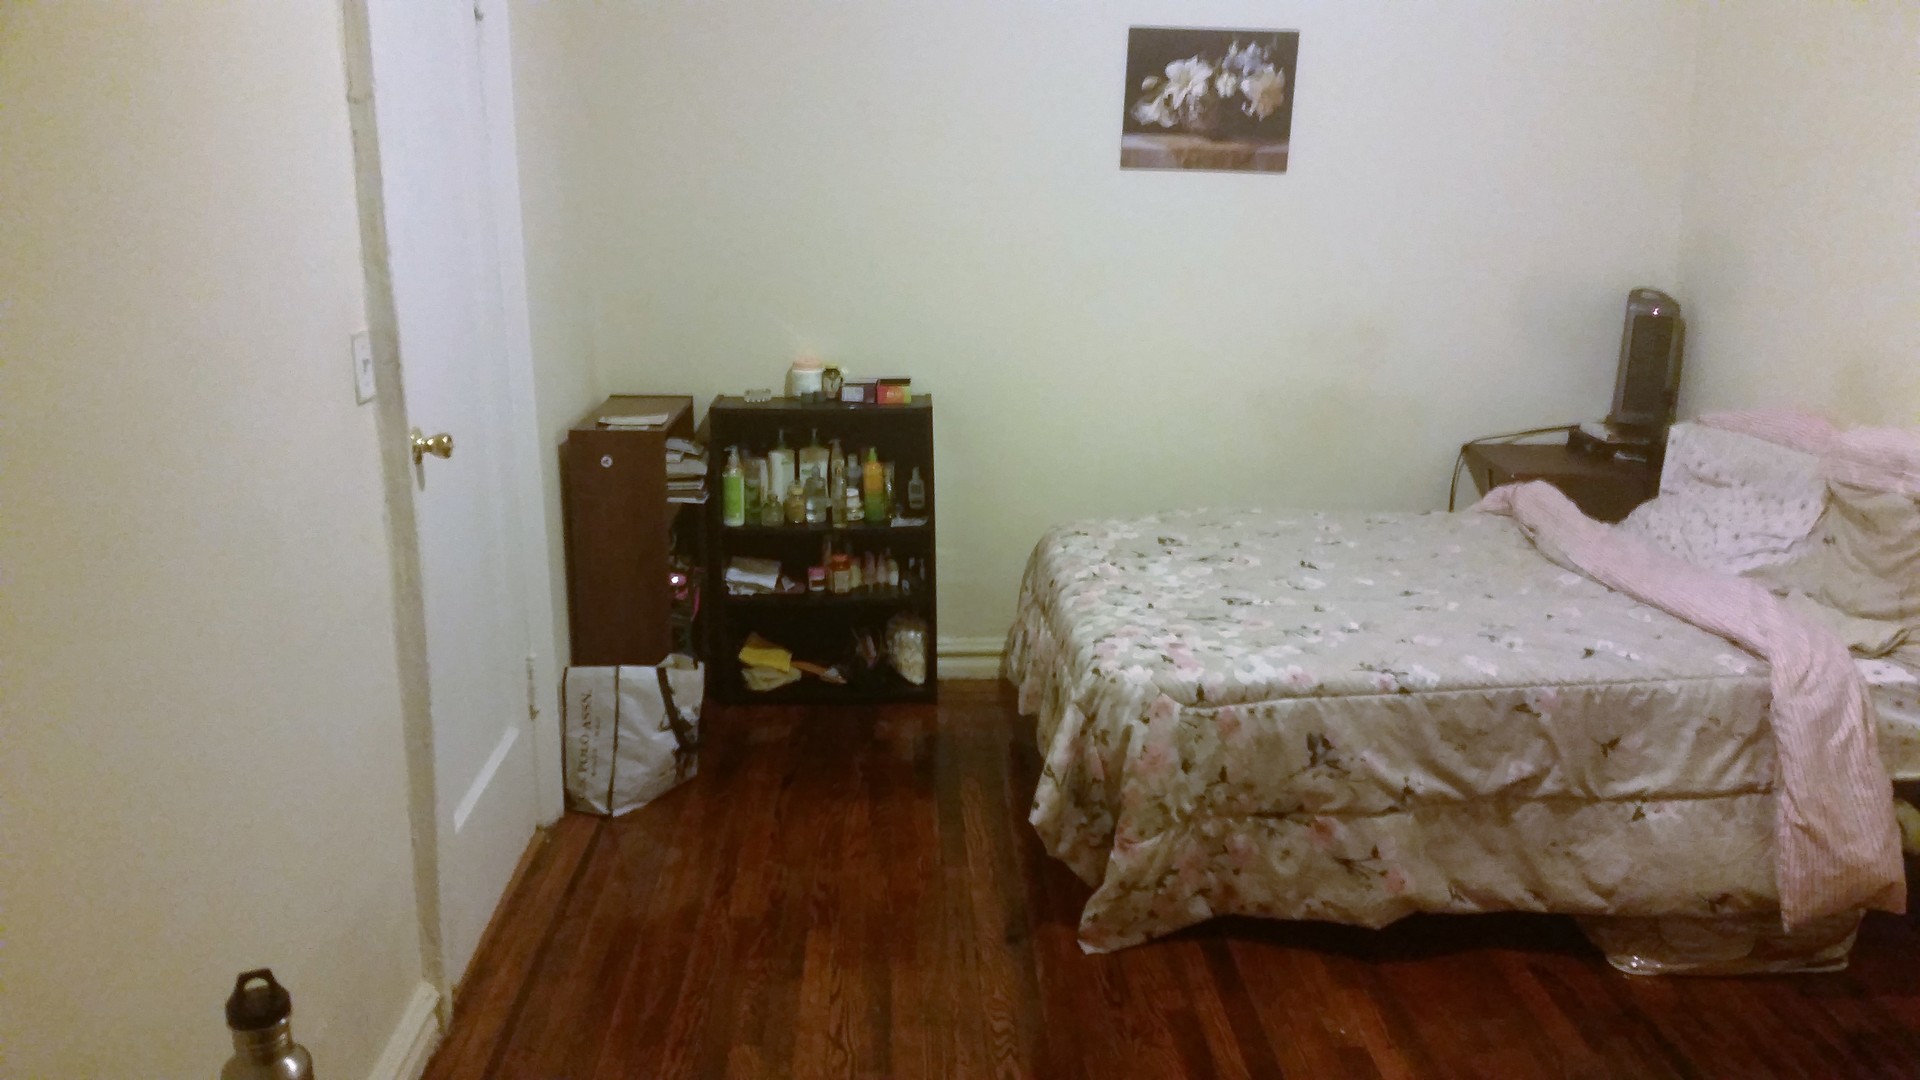 900 Huge Bedroom For Rent One Female Only Room For Rent New